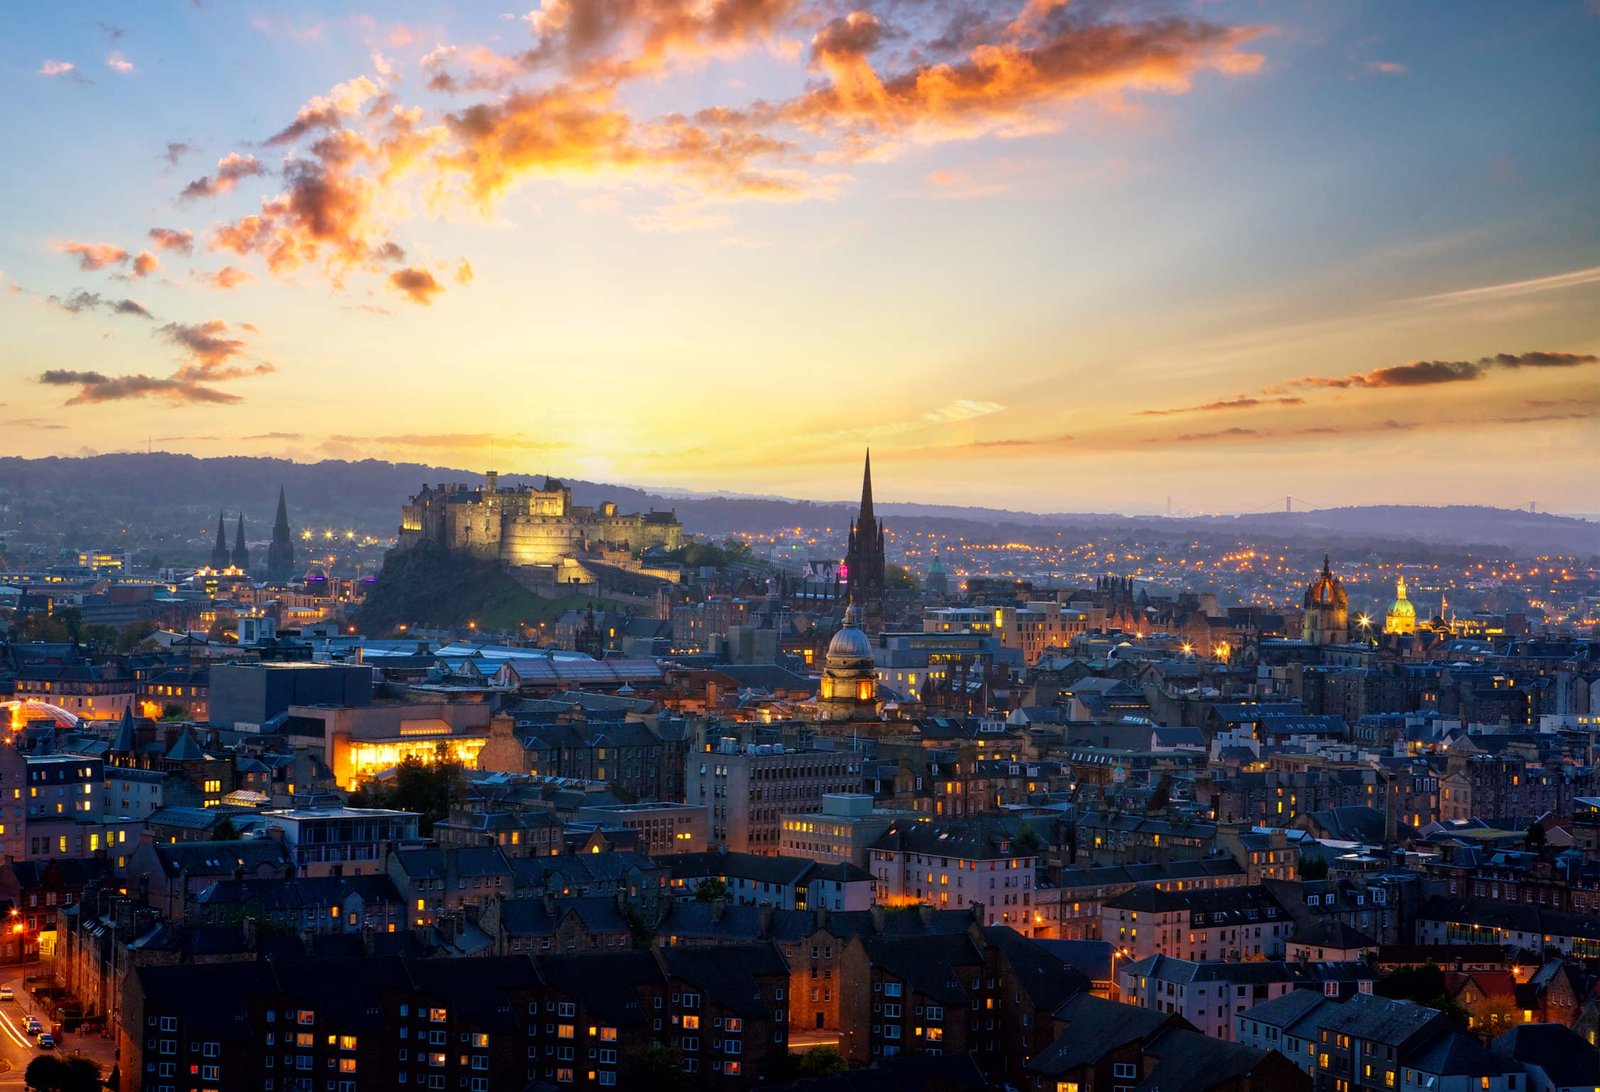 11 Facts You Might Not Know About Edinburgh